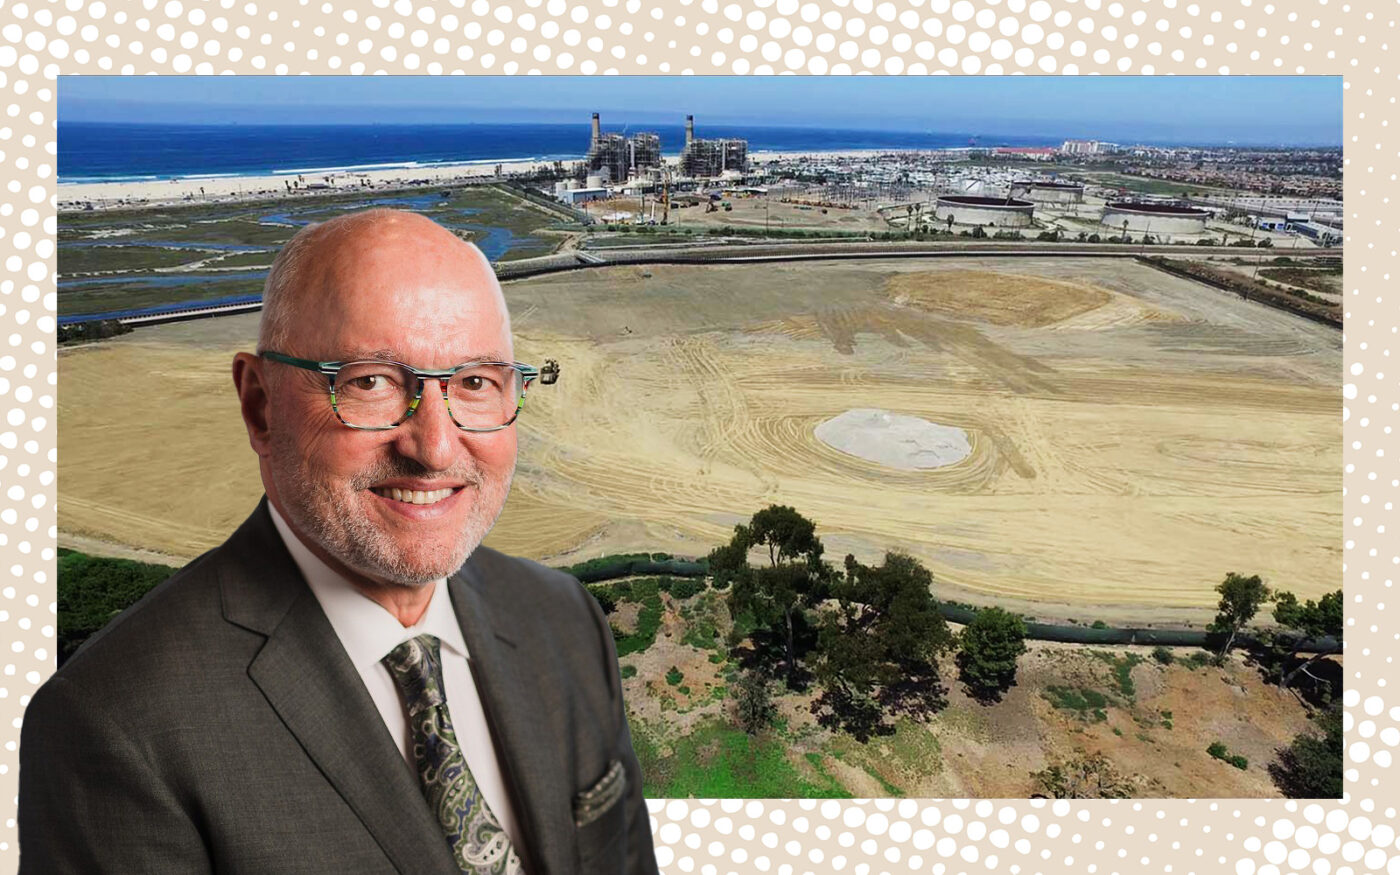 Shopoff to Build 250 Homes and Hotel in Huntington Beach